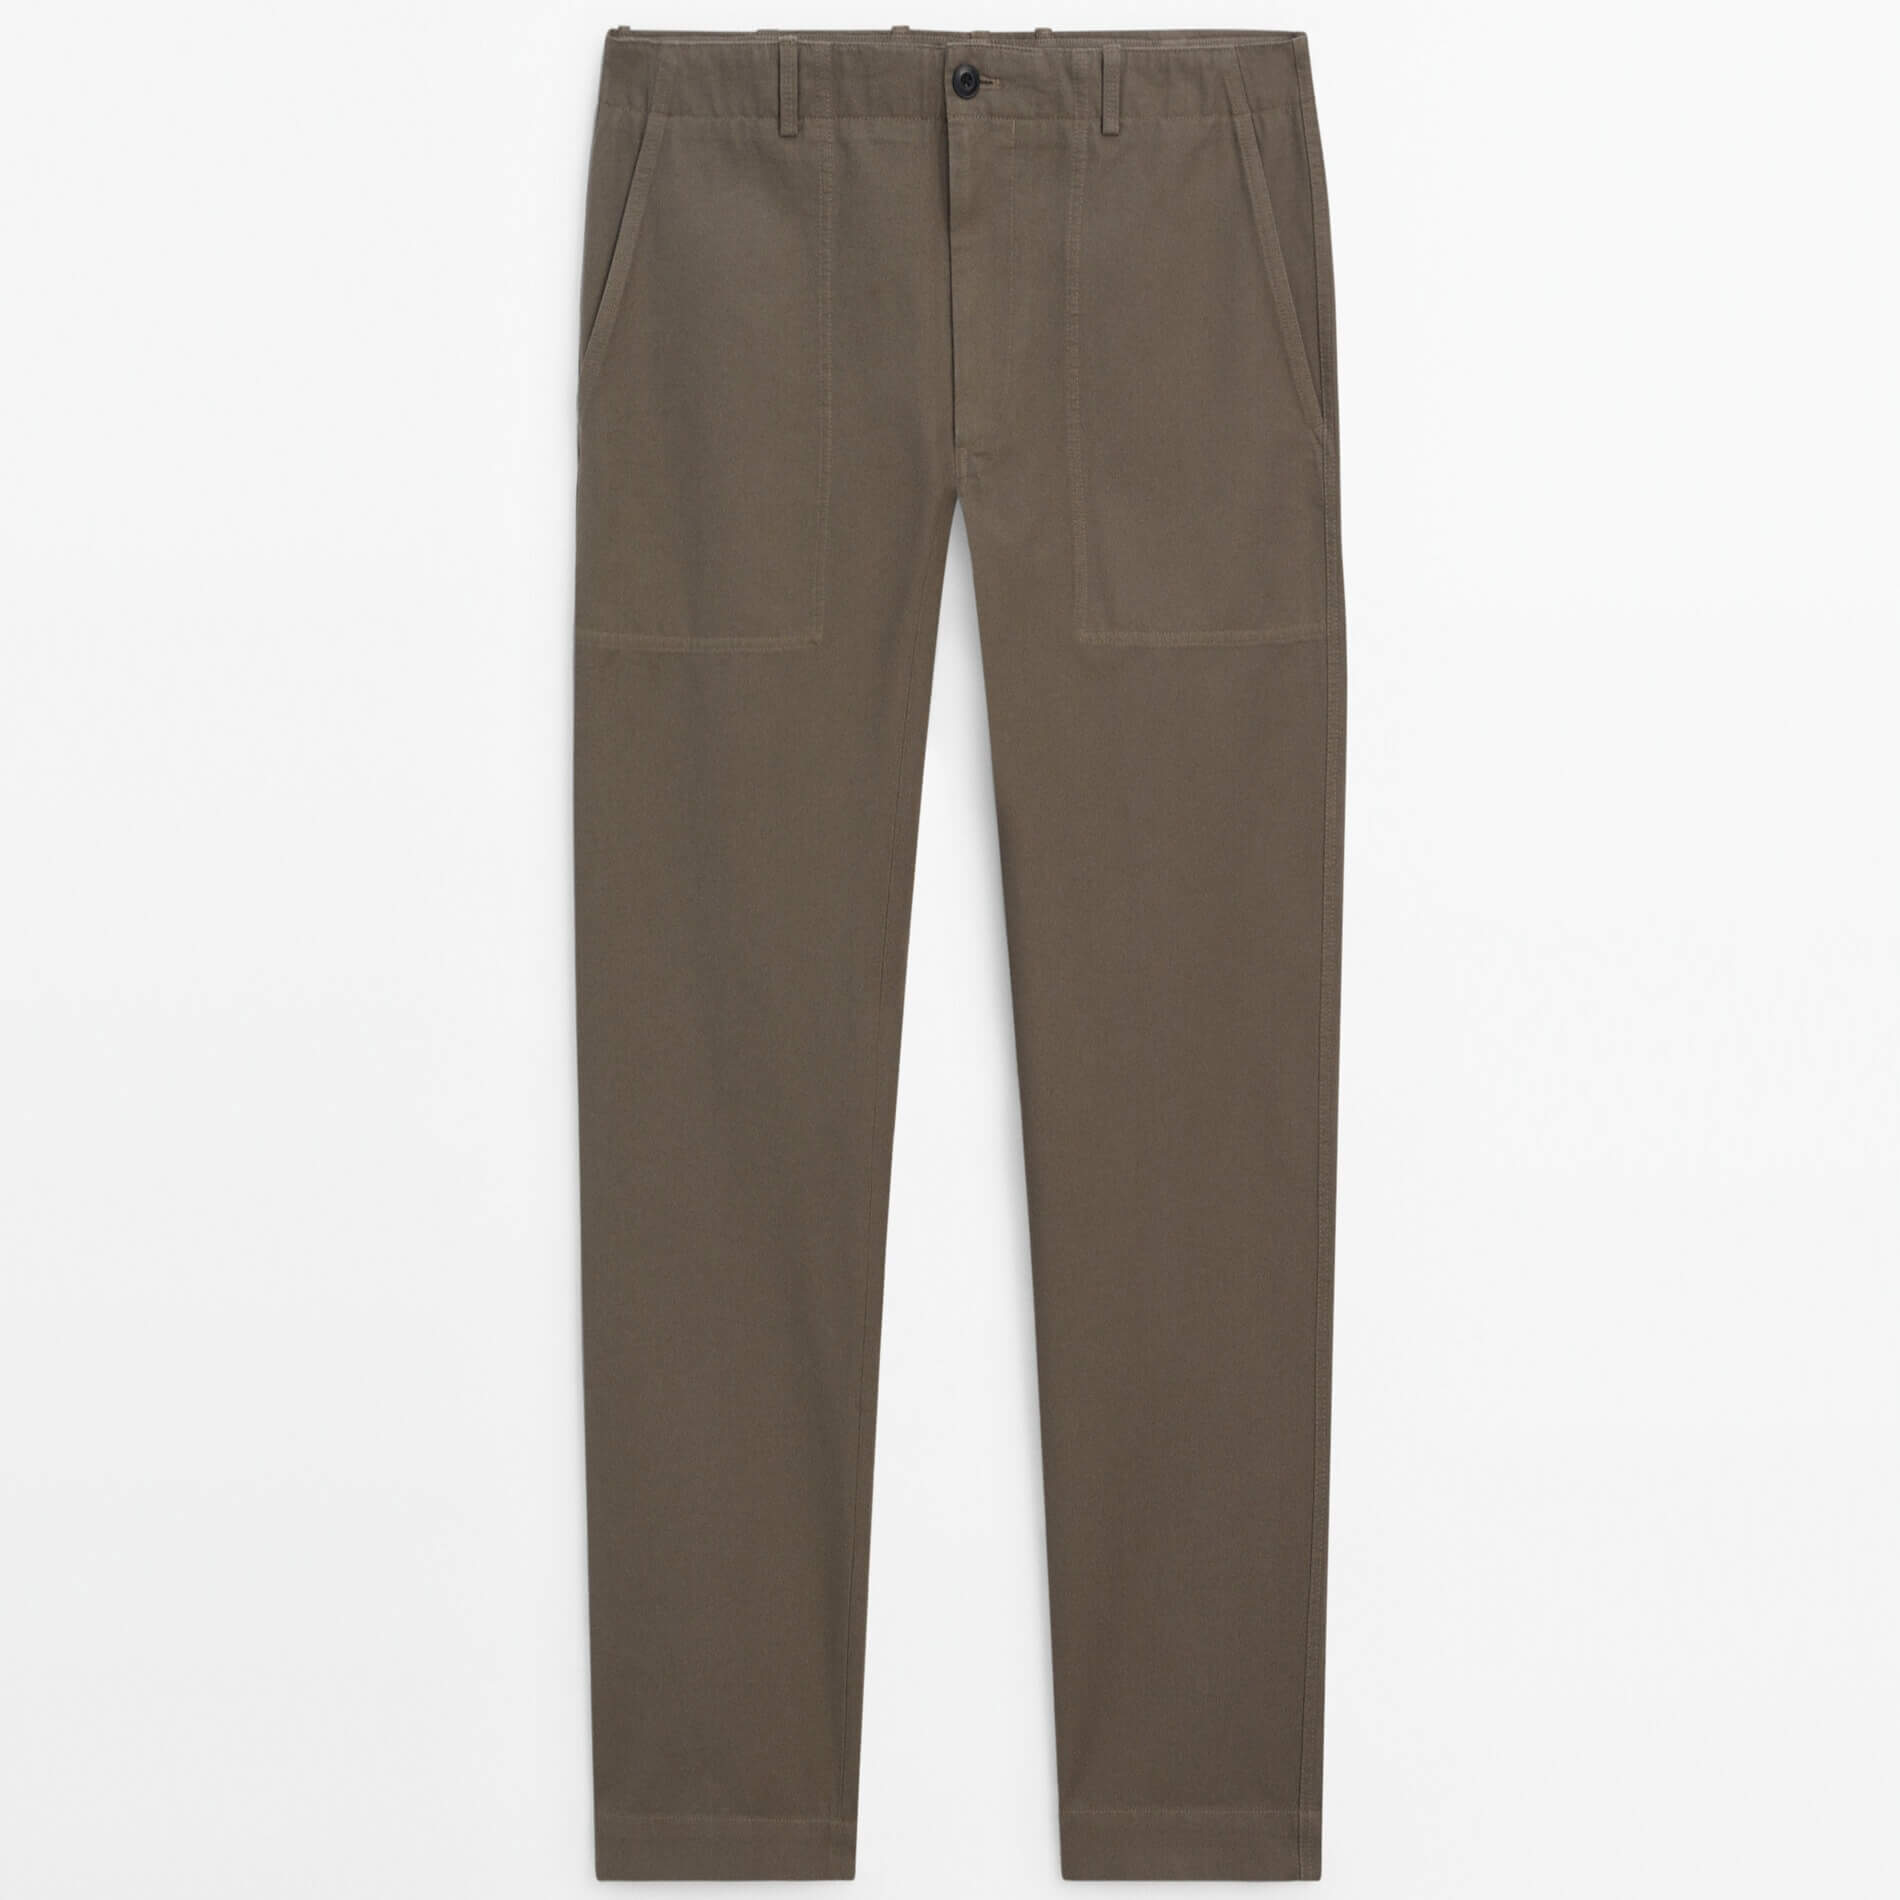 Брюки Massimo Dutti Relaxed Fit Canvas, хаки брюки чинос massimo dutti relaxed fit wool limited edition зелёный